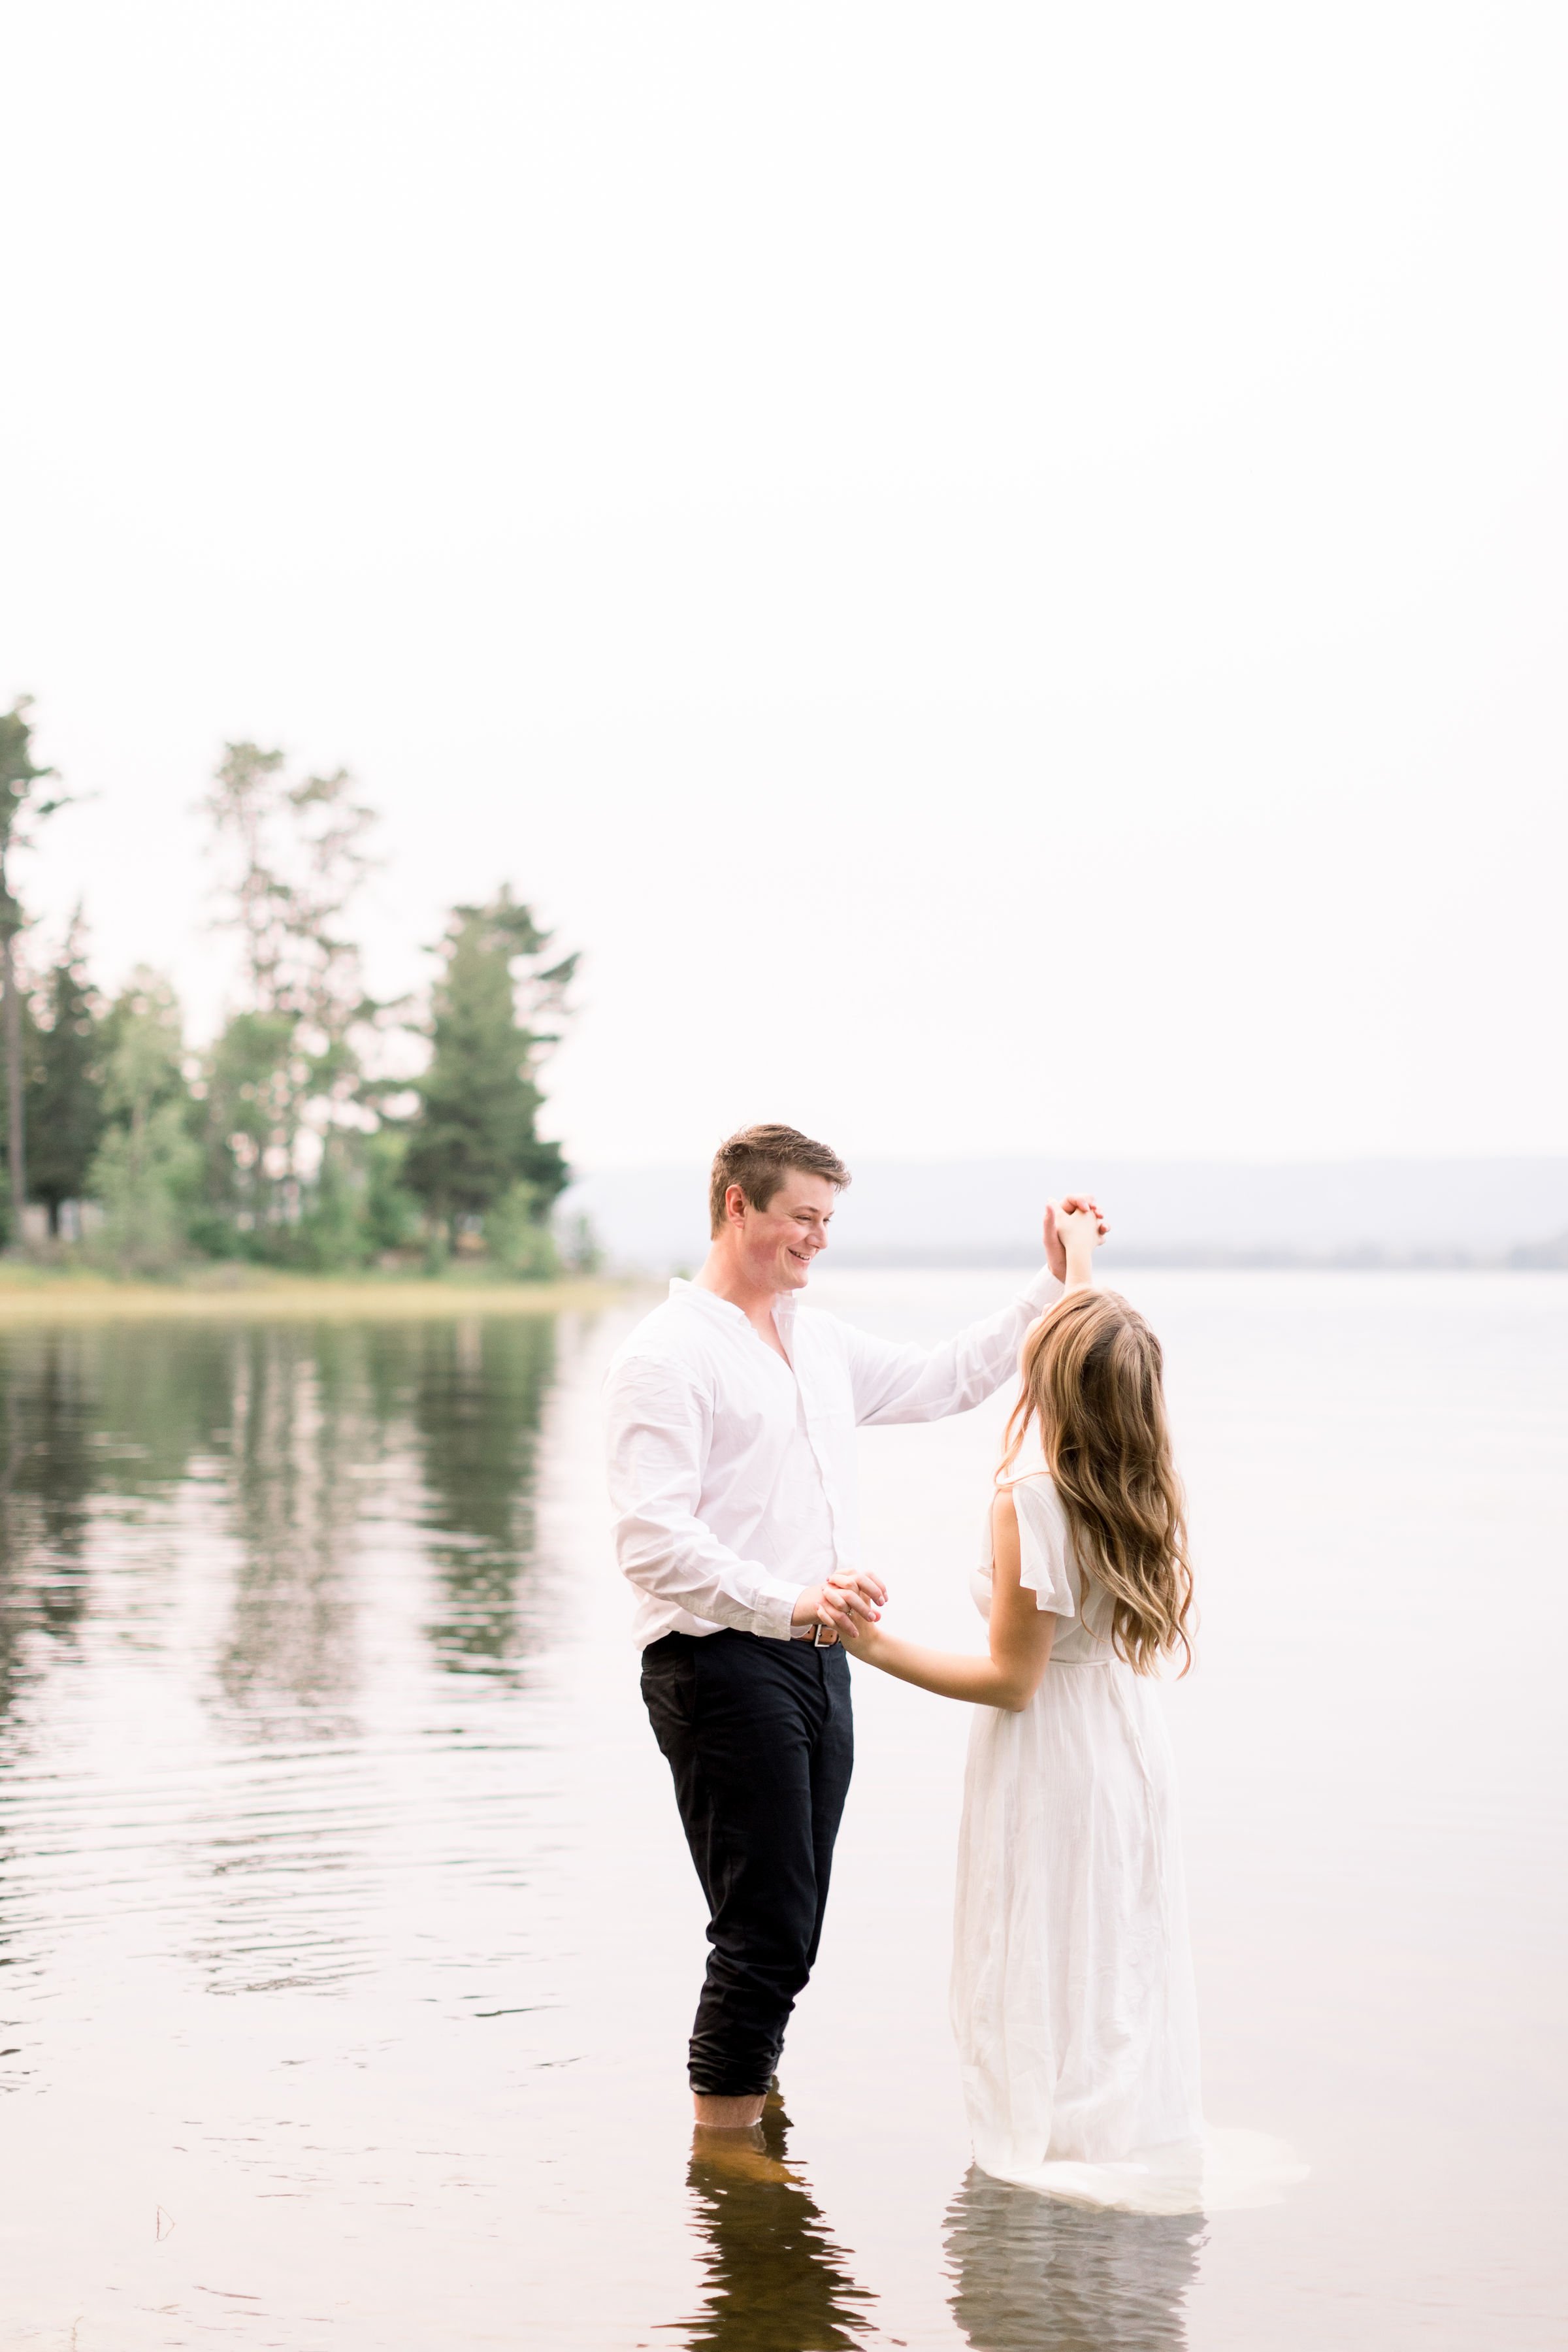  Husband and wife to be, dance in the shallow part of a lake captured by Chelsea Mason Photography. dancing portraits dreamy engagement pictures #ChelseaMasonPhotography #ChelseaMasonEngagements #PinheysPointEngagements #OttawaEngagementPhotography 